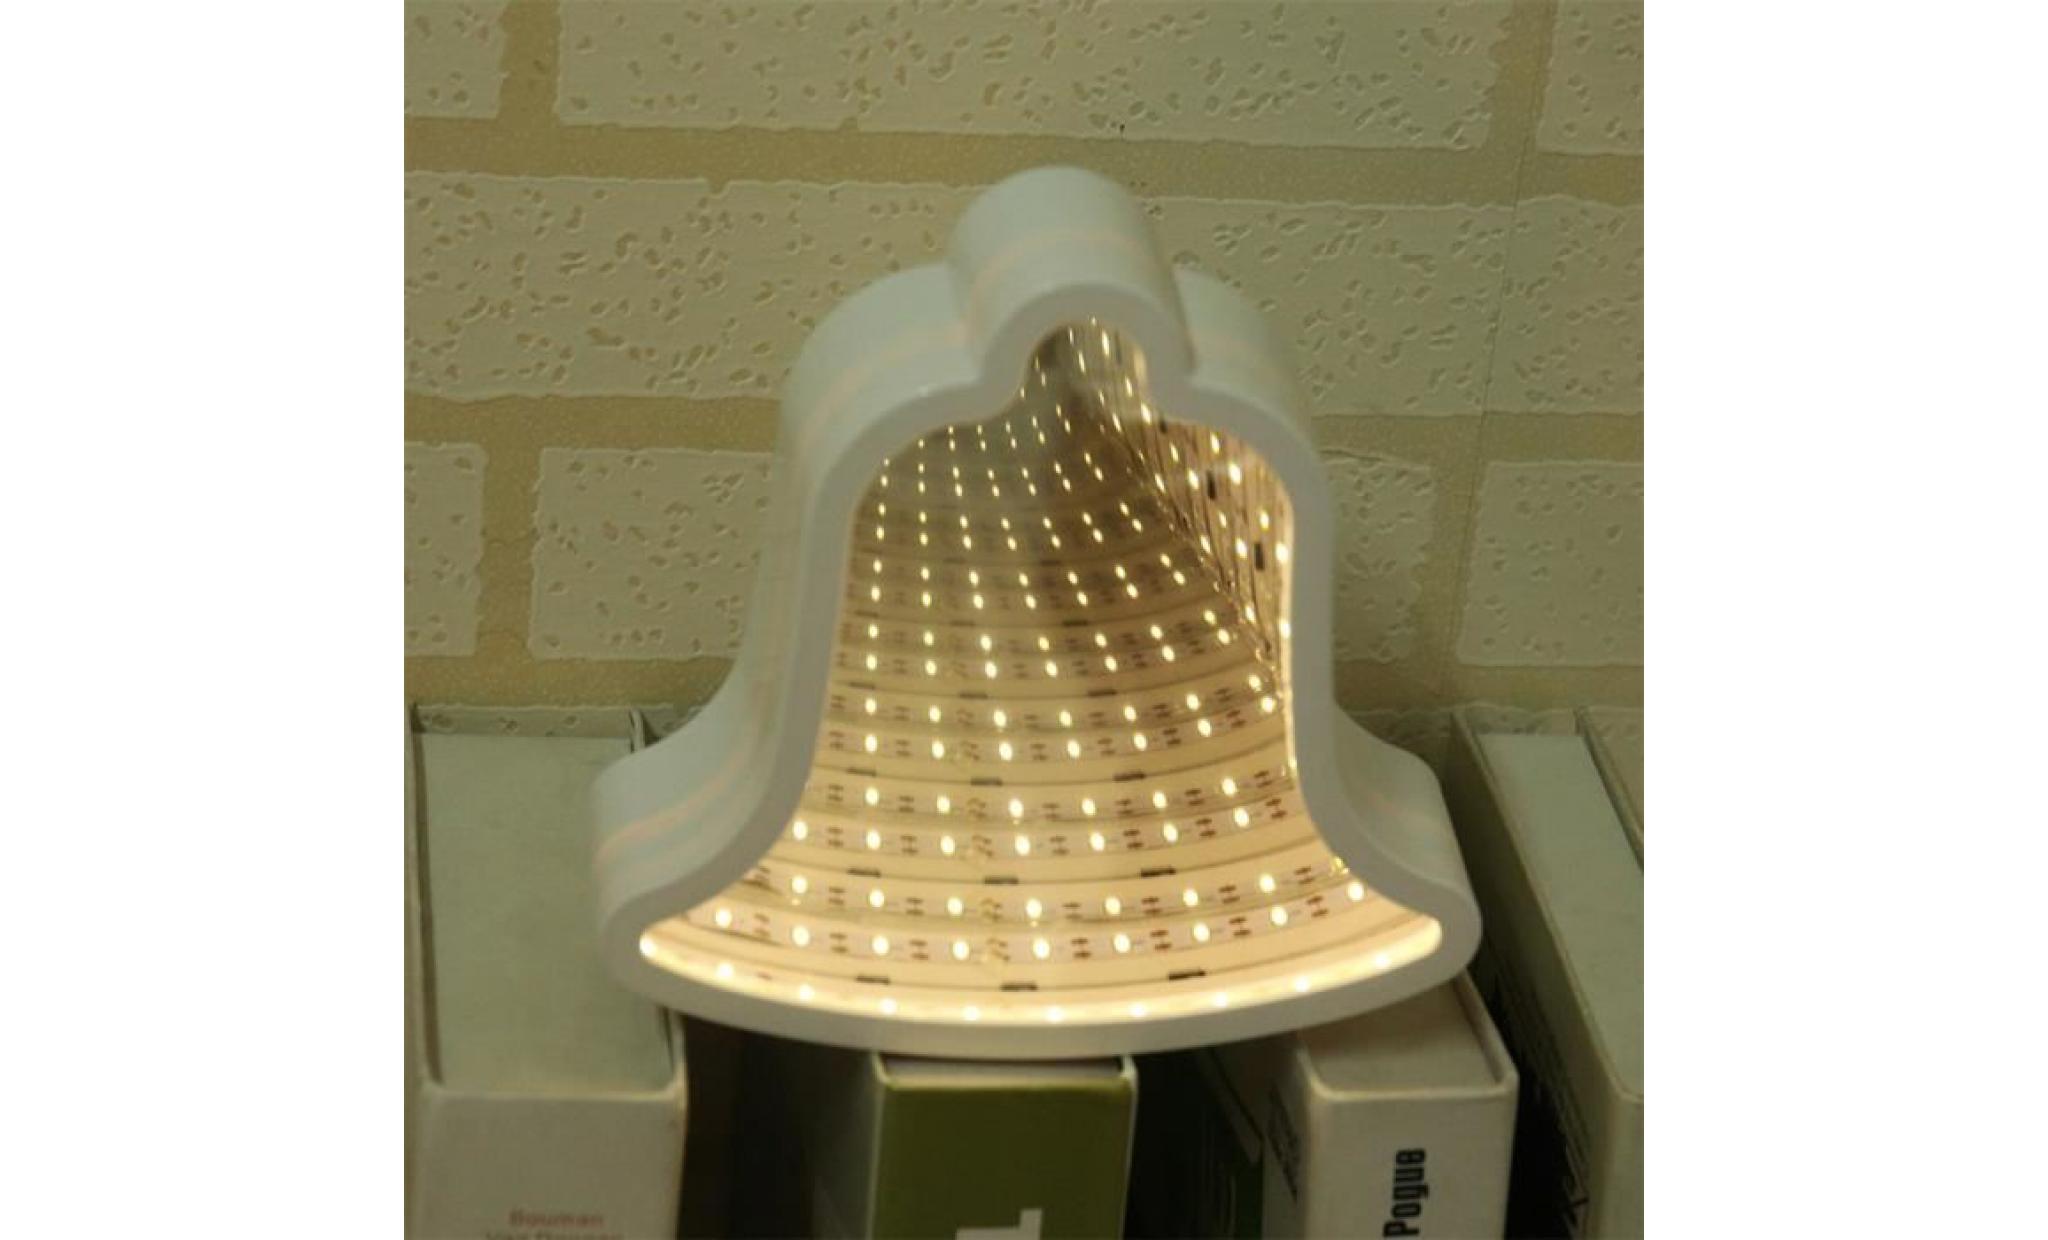 marquee led night light chambre tunnel modeling home décor batterie lampe mur yt2609 pas cher